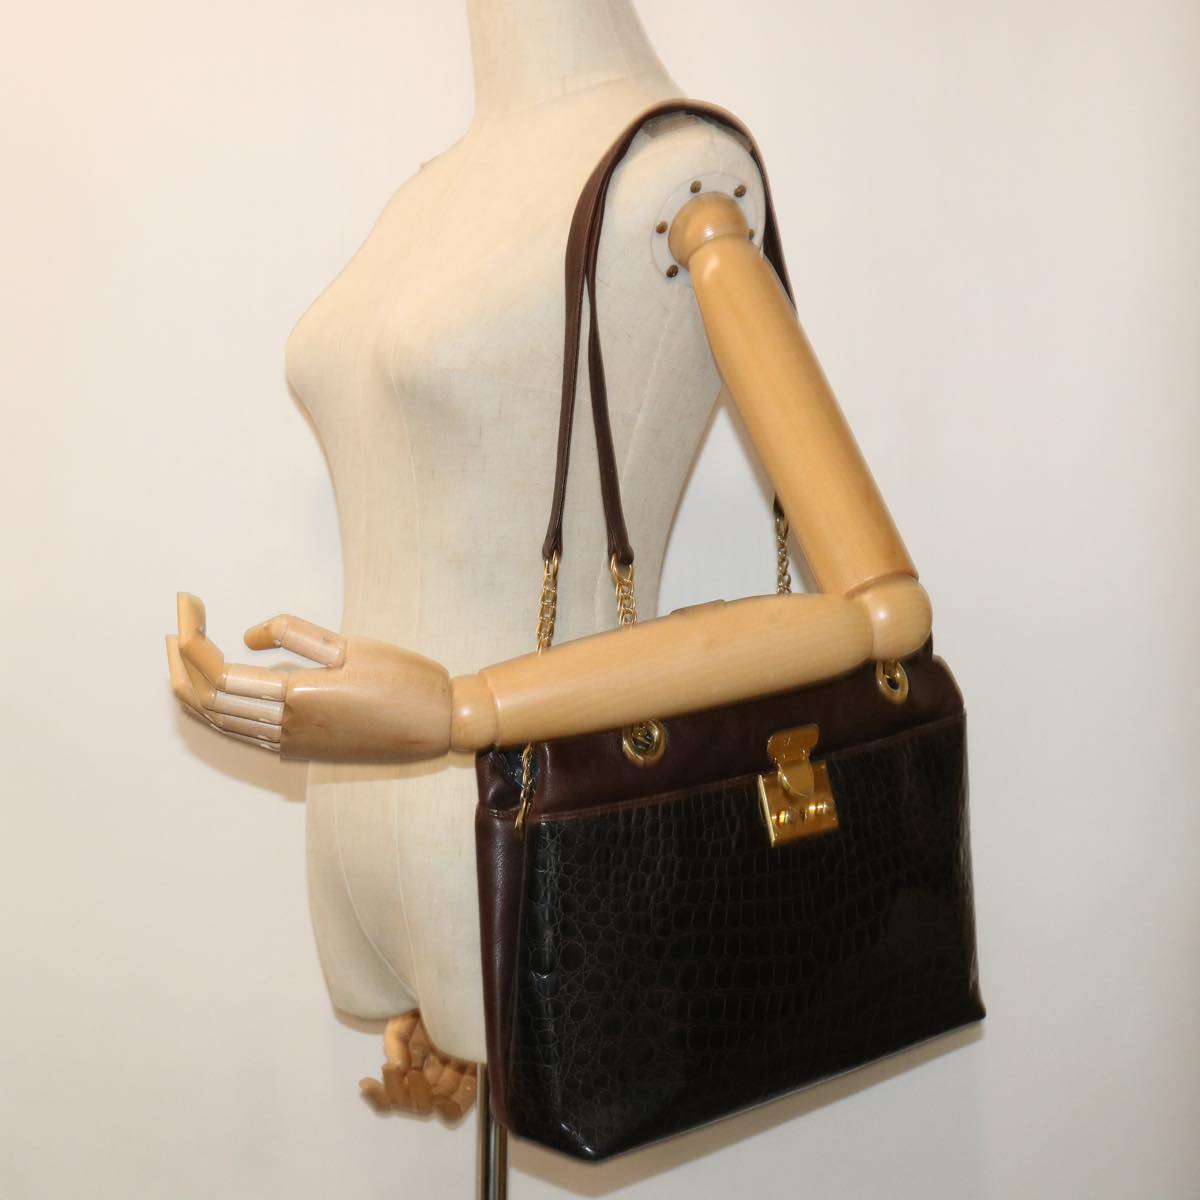 BALLY Shoulder Bag Leather Brown Auth bs7832